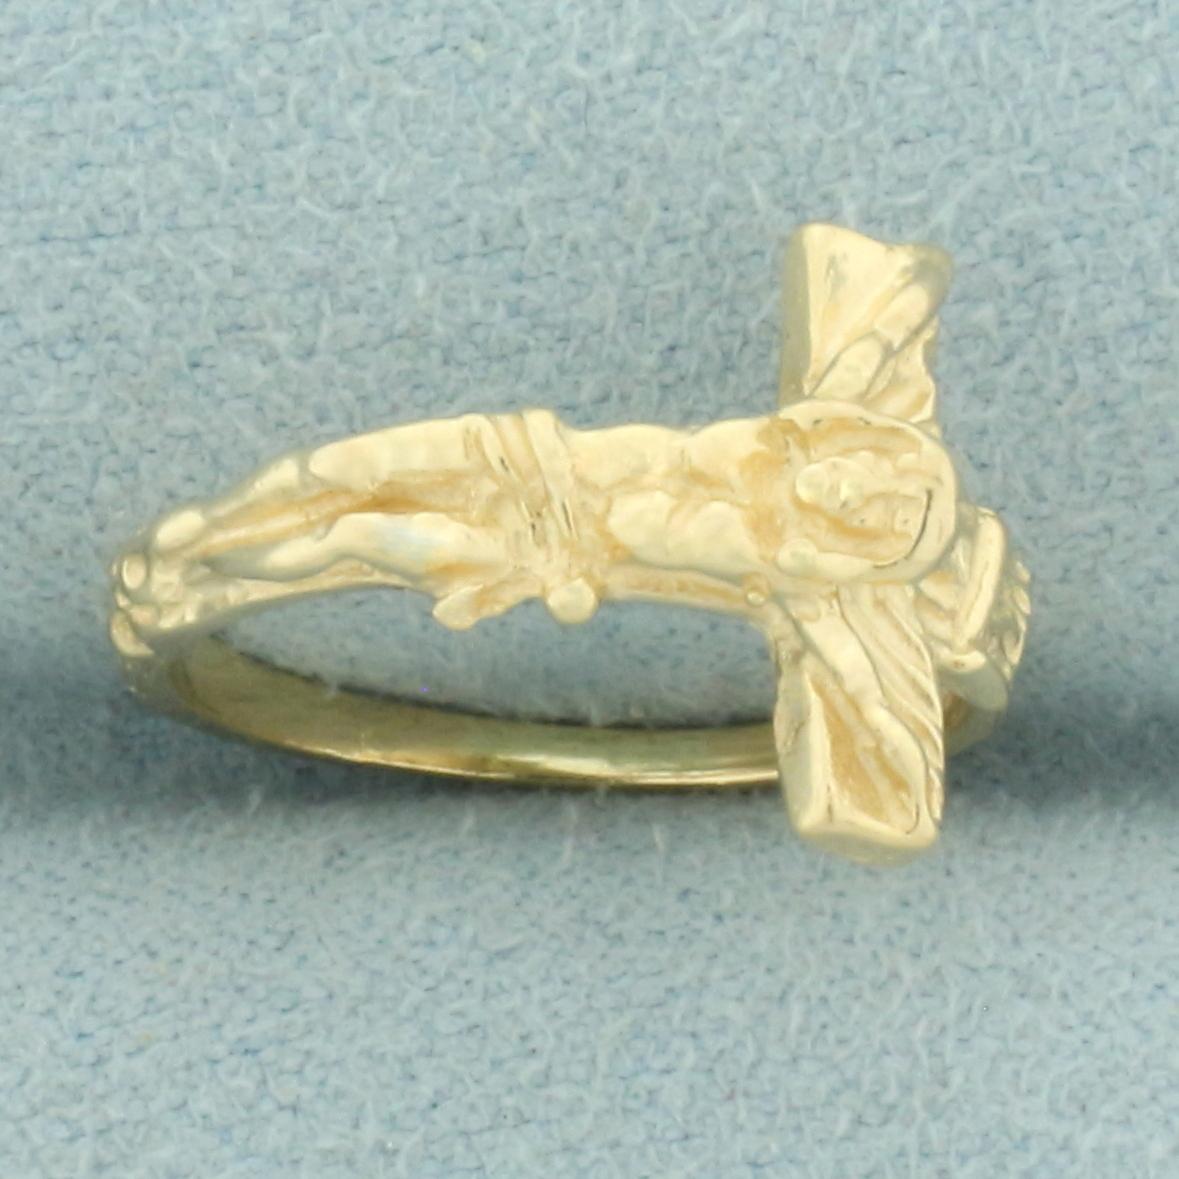 Childs Crucifix Ring In 14k Yellow Gold